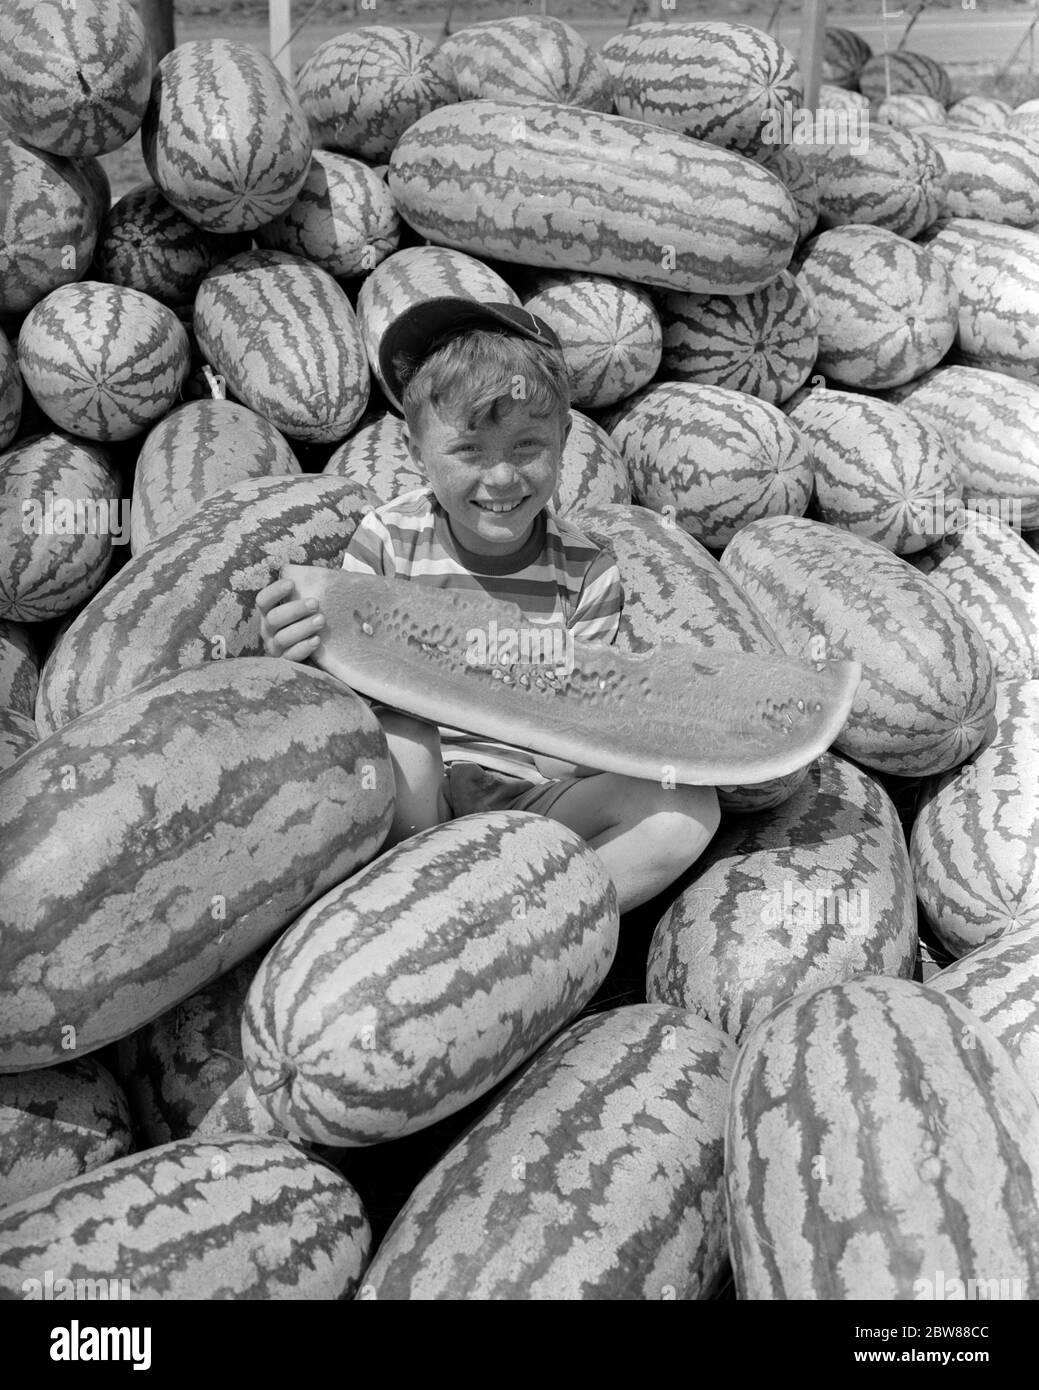 1940s 1950s SMILING BOY WEARING BALL CAP LOOKING AT CAMERA SITTING IN PILE OF WATERMELONS EATING A LARGE SLICE OF ONE - j11011 HEL001 HARS MULTIPLE OLD TIME ARCHIVE NOSTALGIA OLD FASHION 1 JUVENILE MANY COOL SNACK PLEASED JOY LIFESTYLE HEALTHINESS LUXURY UNITED STATES STRIPE PEOPLE CHILDREN UNITED STATES OF AMERICA MALES DESSERT SERENITY AMERICANA FOODS SNACK FOODS B&W BURIED BOUNTY SUCCESS SNACKS SLICE DREAMS HUNGRY HAPPINESS HEAD AND SHOULDERS ARCHIVAL SNACK FOOD CONTEST EXCITEMENT RECREATION REDHEAD A IN OF HUNGER SMILES WATERMELON MELON WATERMELONS GLUTTON BOUNTIFUL JOYFUL PRODUCE T-SHIRT Stock Photo